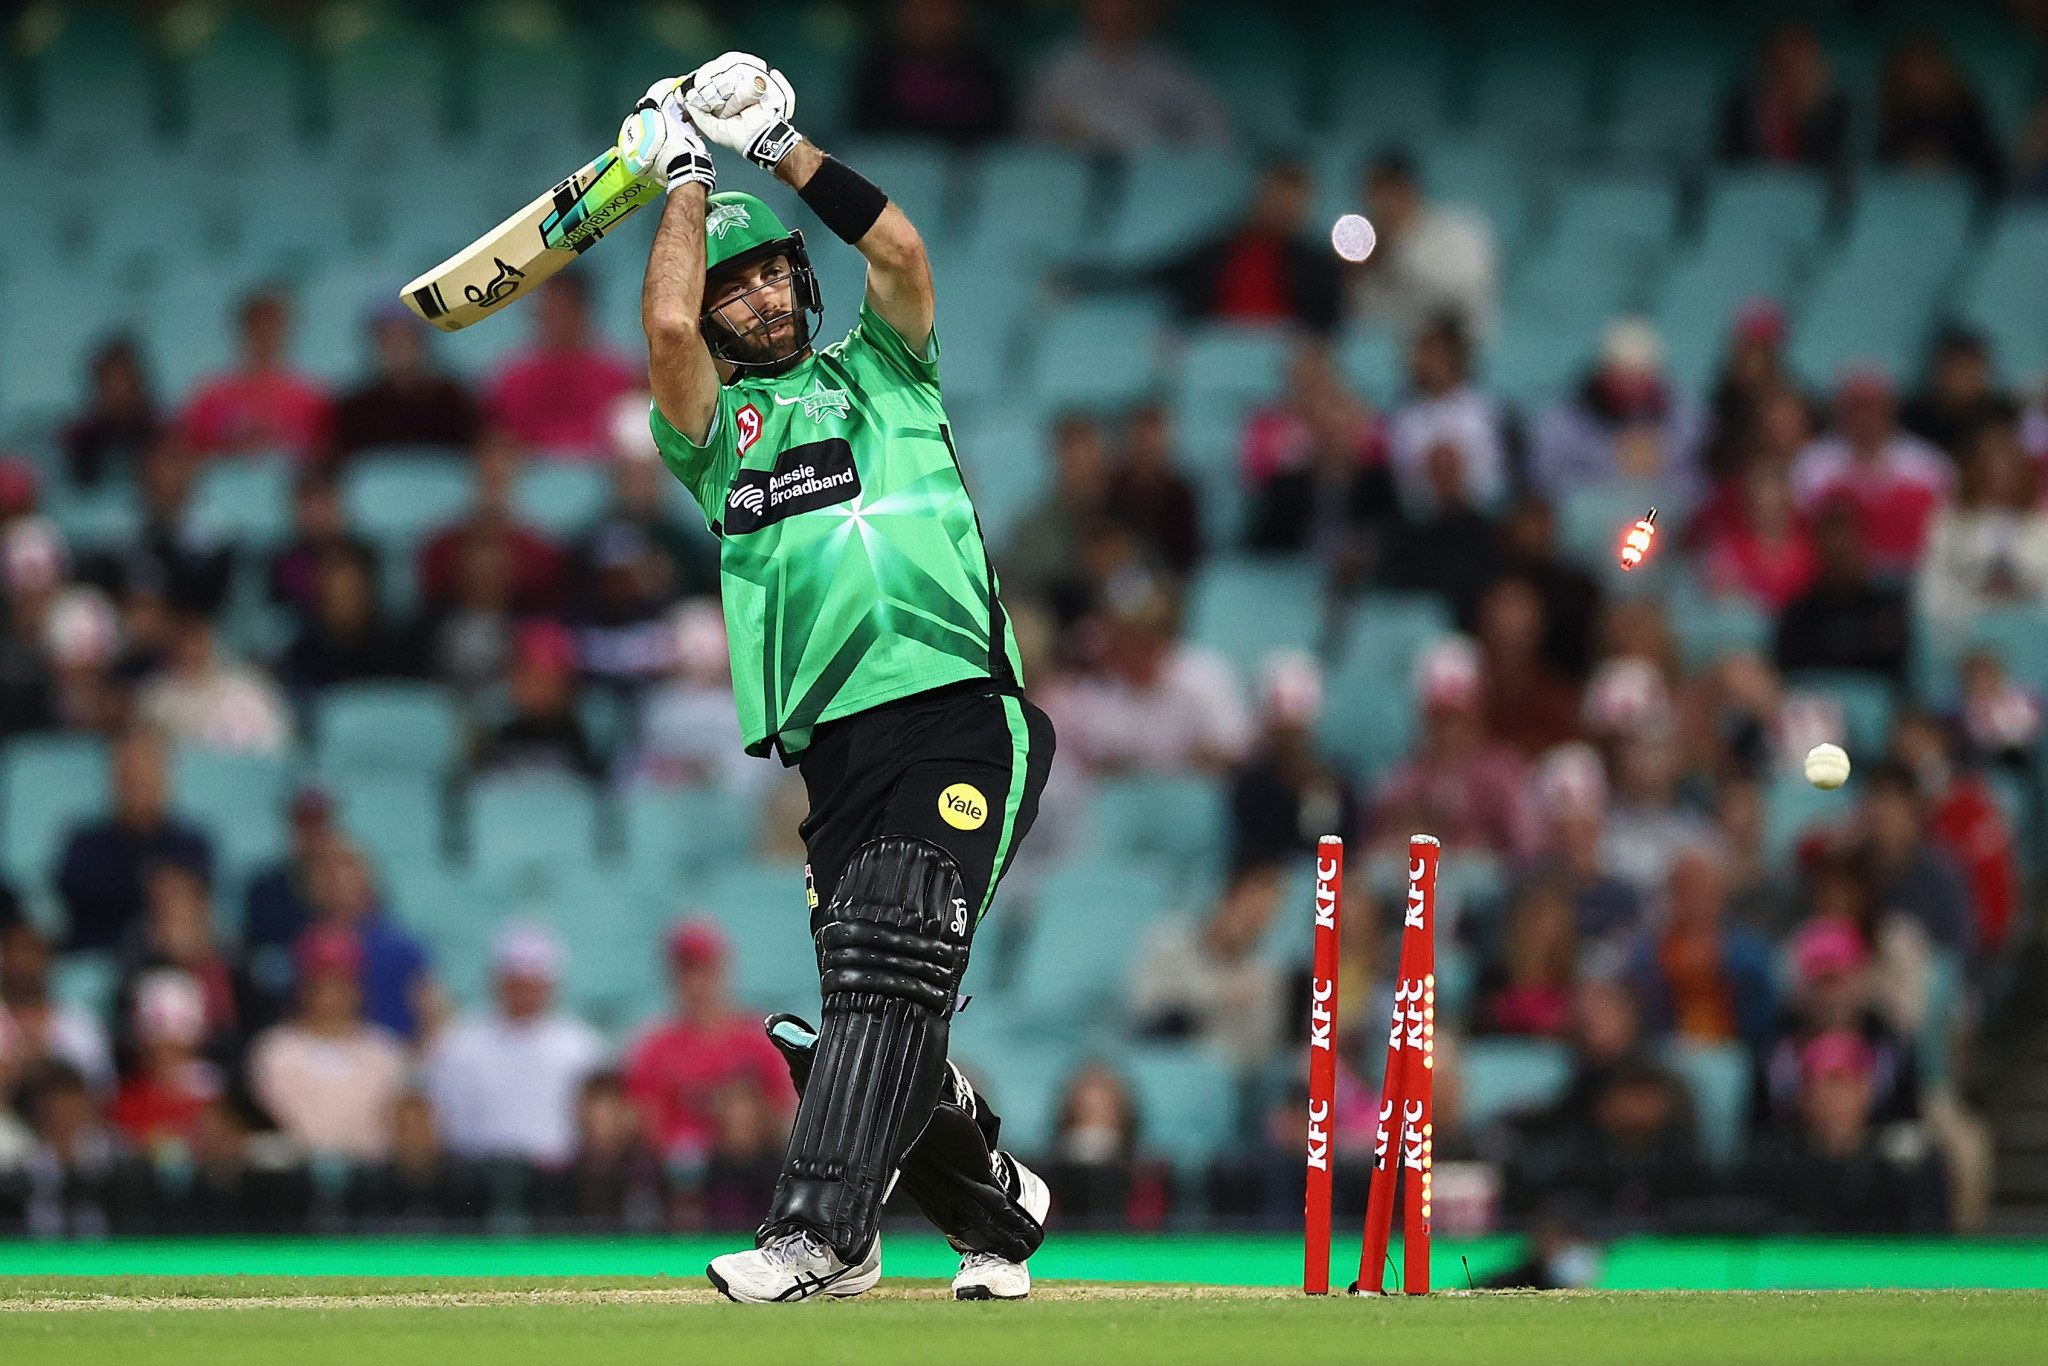 OBG Productions has worked with organisations including the Melbourne Stars  ©Getty Images